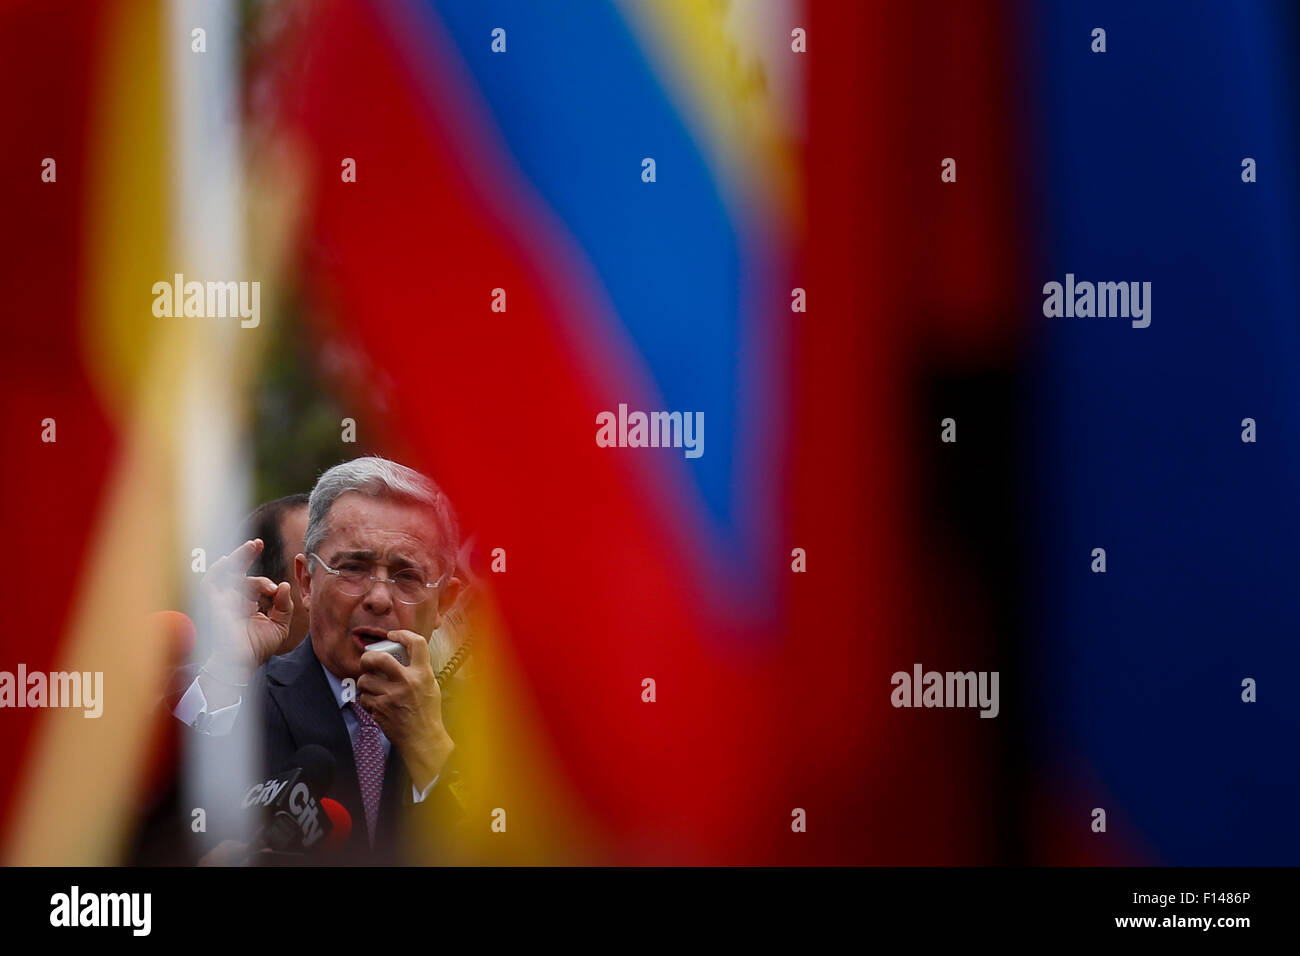 Bogota, Colombia. 26th Aug, 2015. Former Colombian President and Senator Alvaro Uribe takes part in a sit-in in front of the Venzuelan consulate in Bogota, Colombia, on Aug. 26, 2015. According to local press, Uribe headed for Wednesday a sit-in in the Venezuelan consulate to demonstrate for the crisis generated by the closure of the border between Colombia and Venezuela and to protest against the treatment given to Colombians in the border. © Mauricio Alvarado/COLPRENSA/Xinhua/Alamy Live News Stock Photo